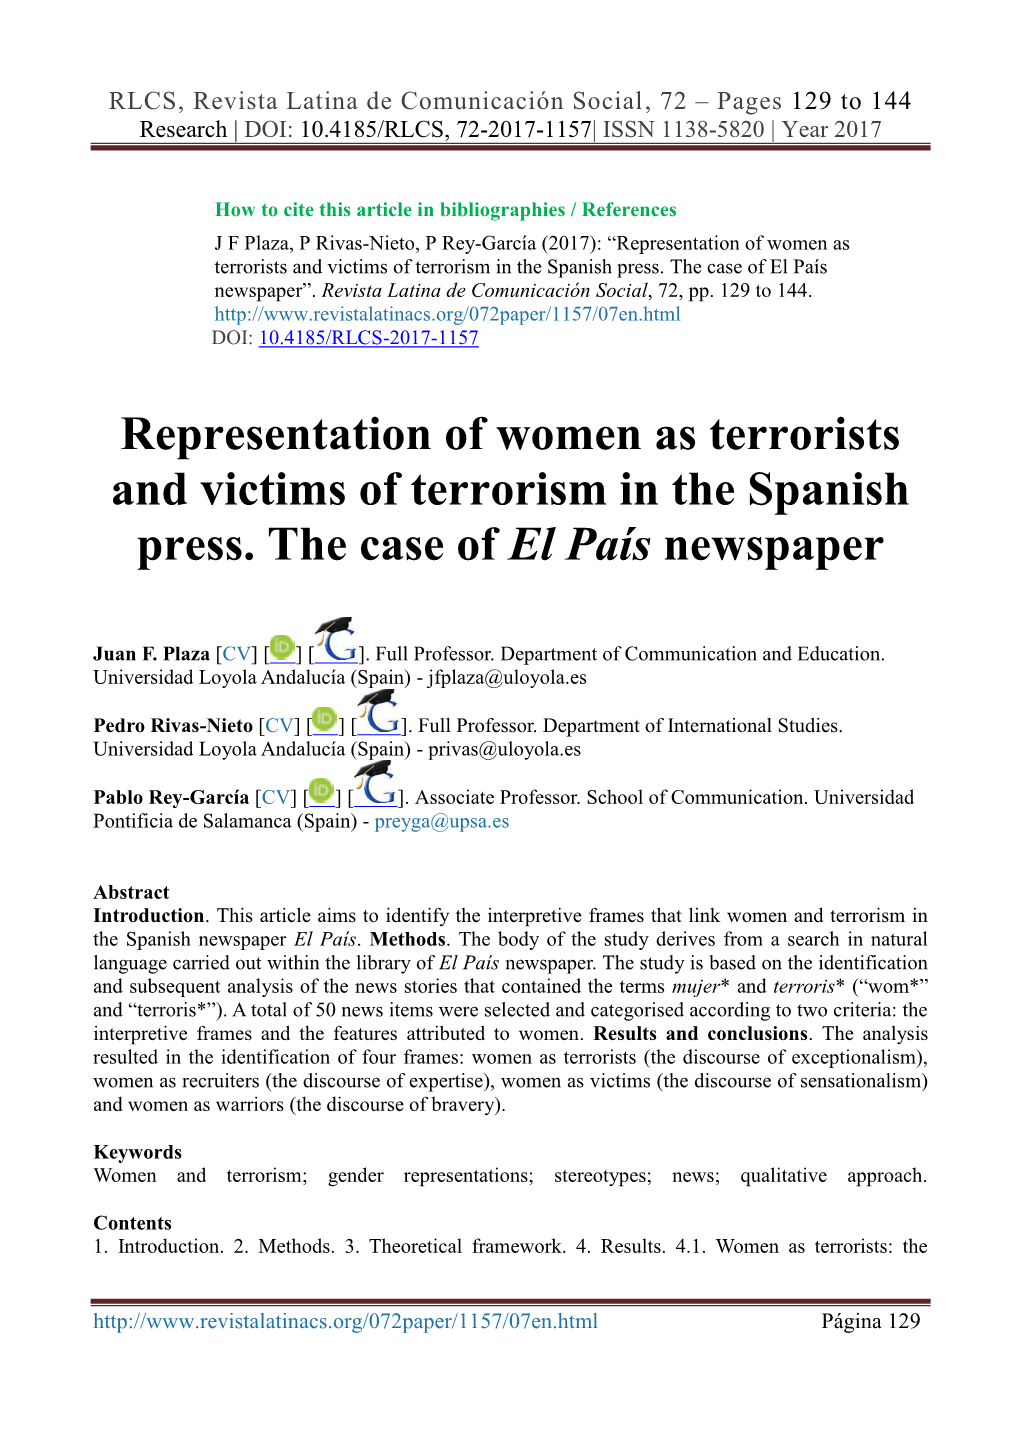 Representation of Women As Terrorists and Victims of Terrorism in the Spanish Press